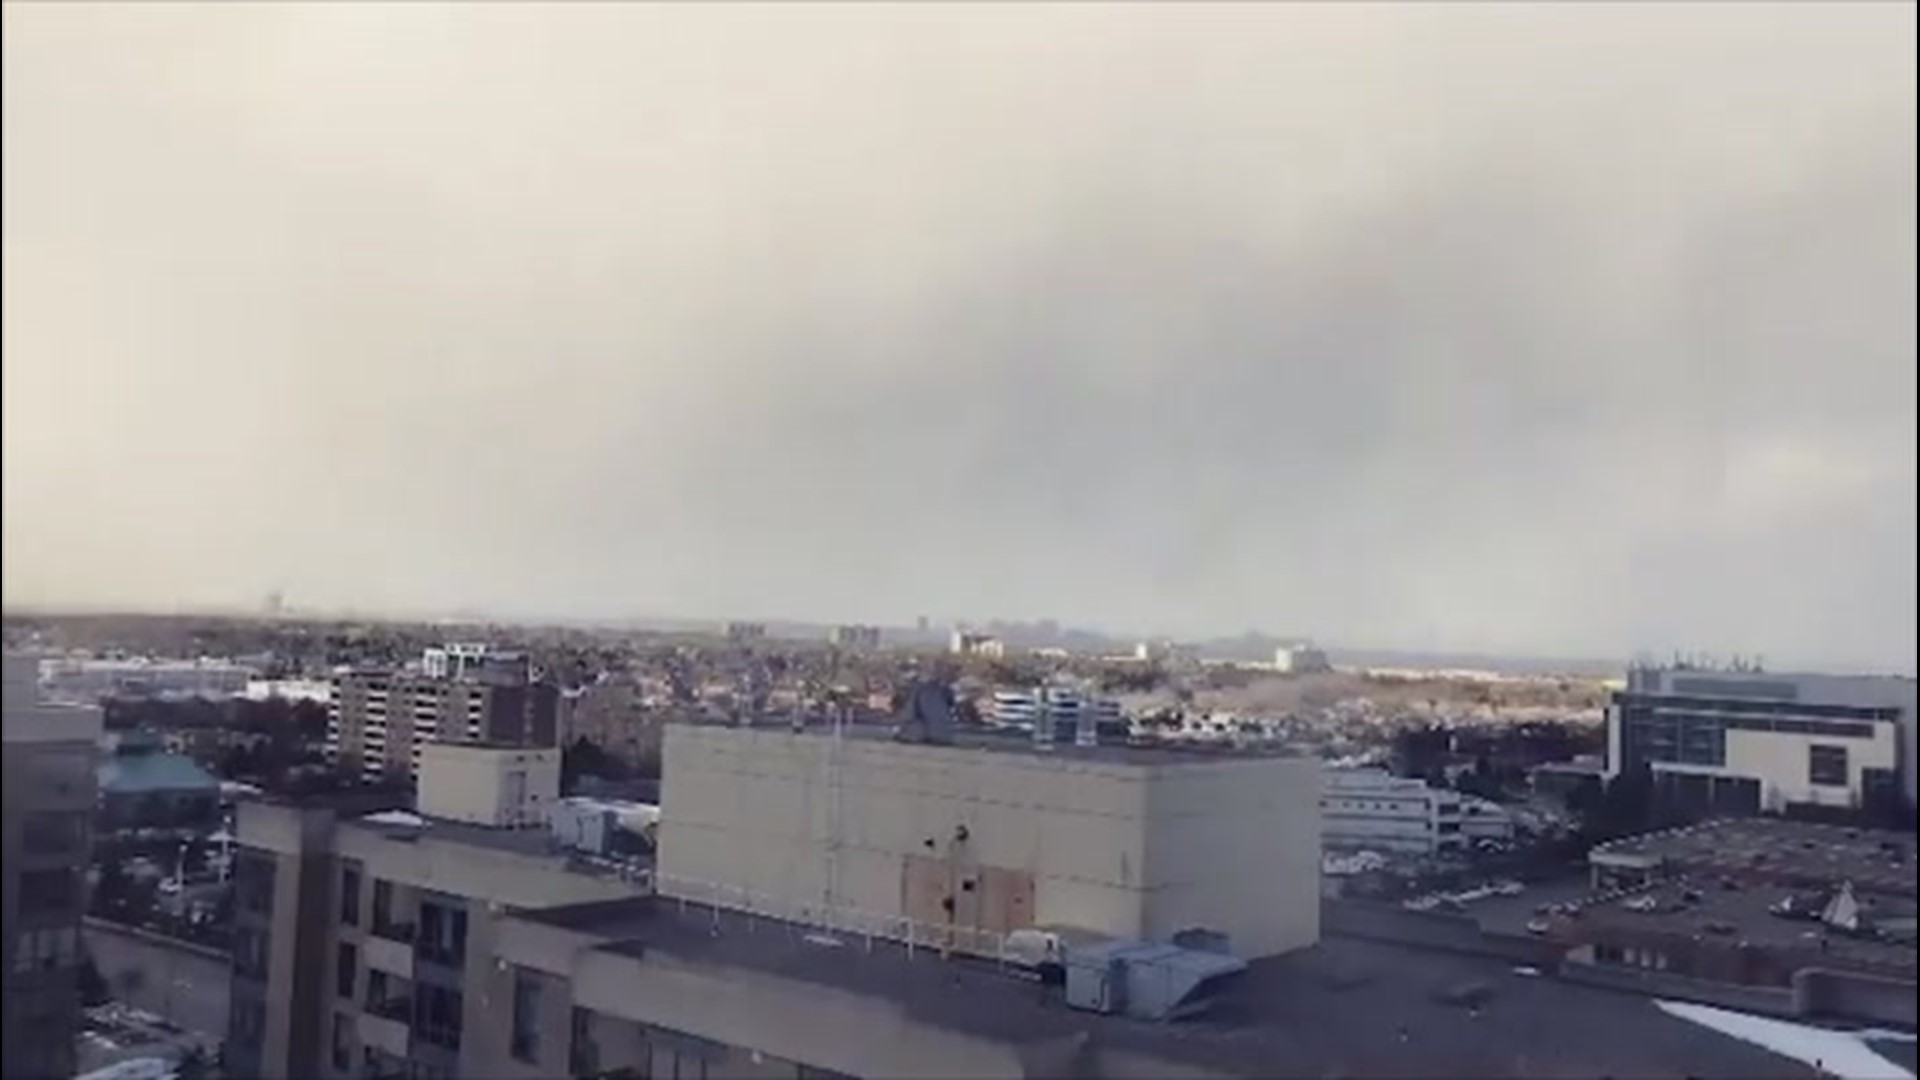 This time-lapse video captures a massive shift in clouds on March 1 as snow squalls quickly cover the city of Brampton.